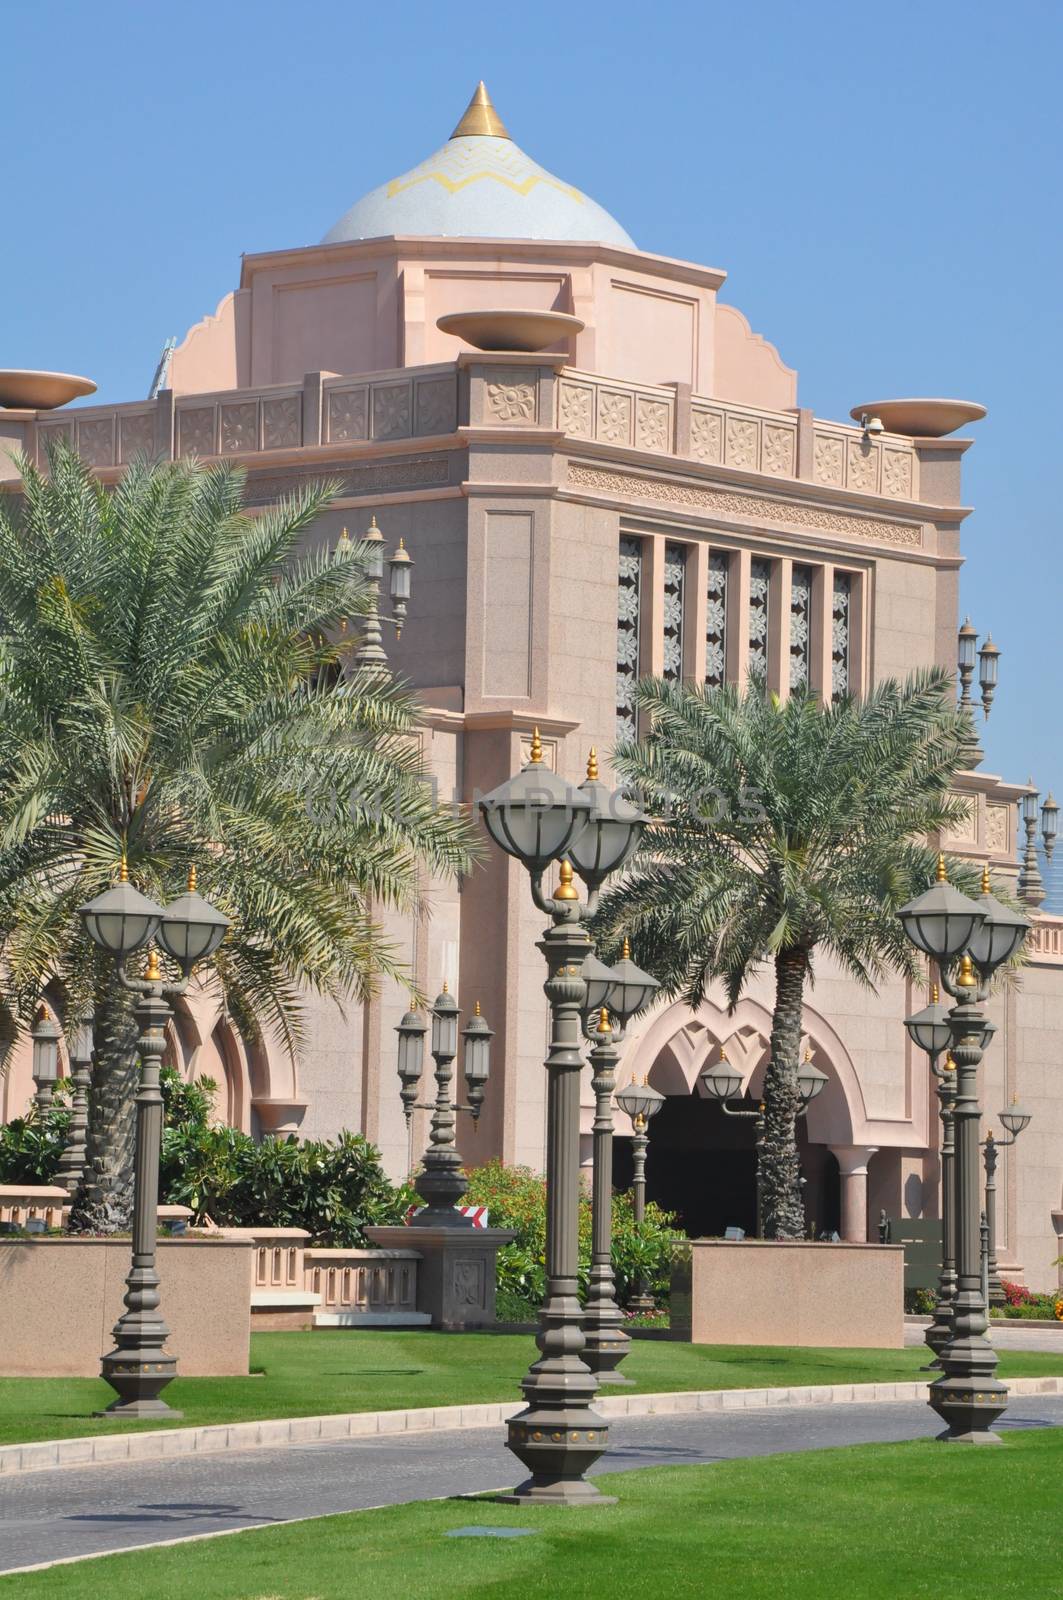 Emirates Palace Hotel in Abu Dhabi, UAE. It is a seven star luxury hotel and has its own marina and helipad.